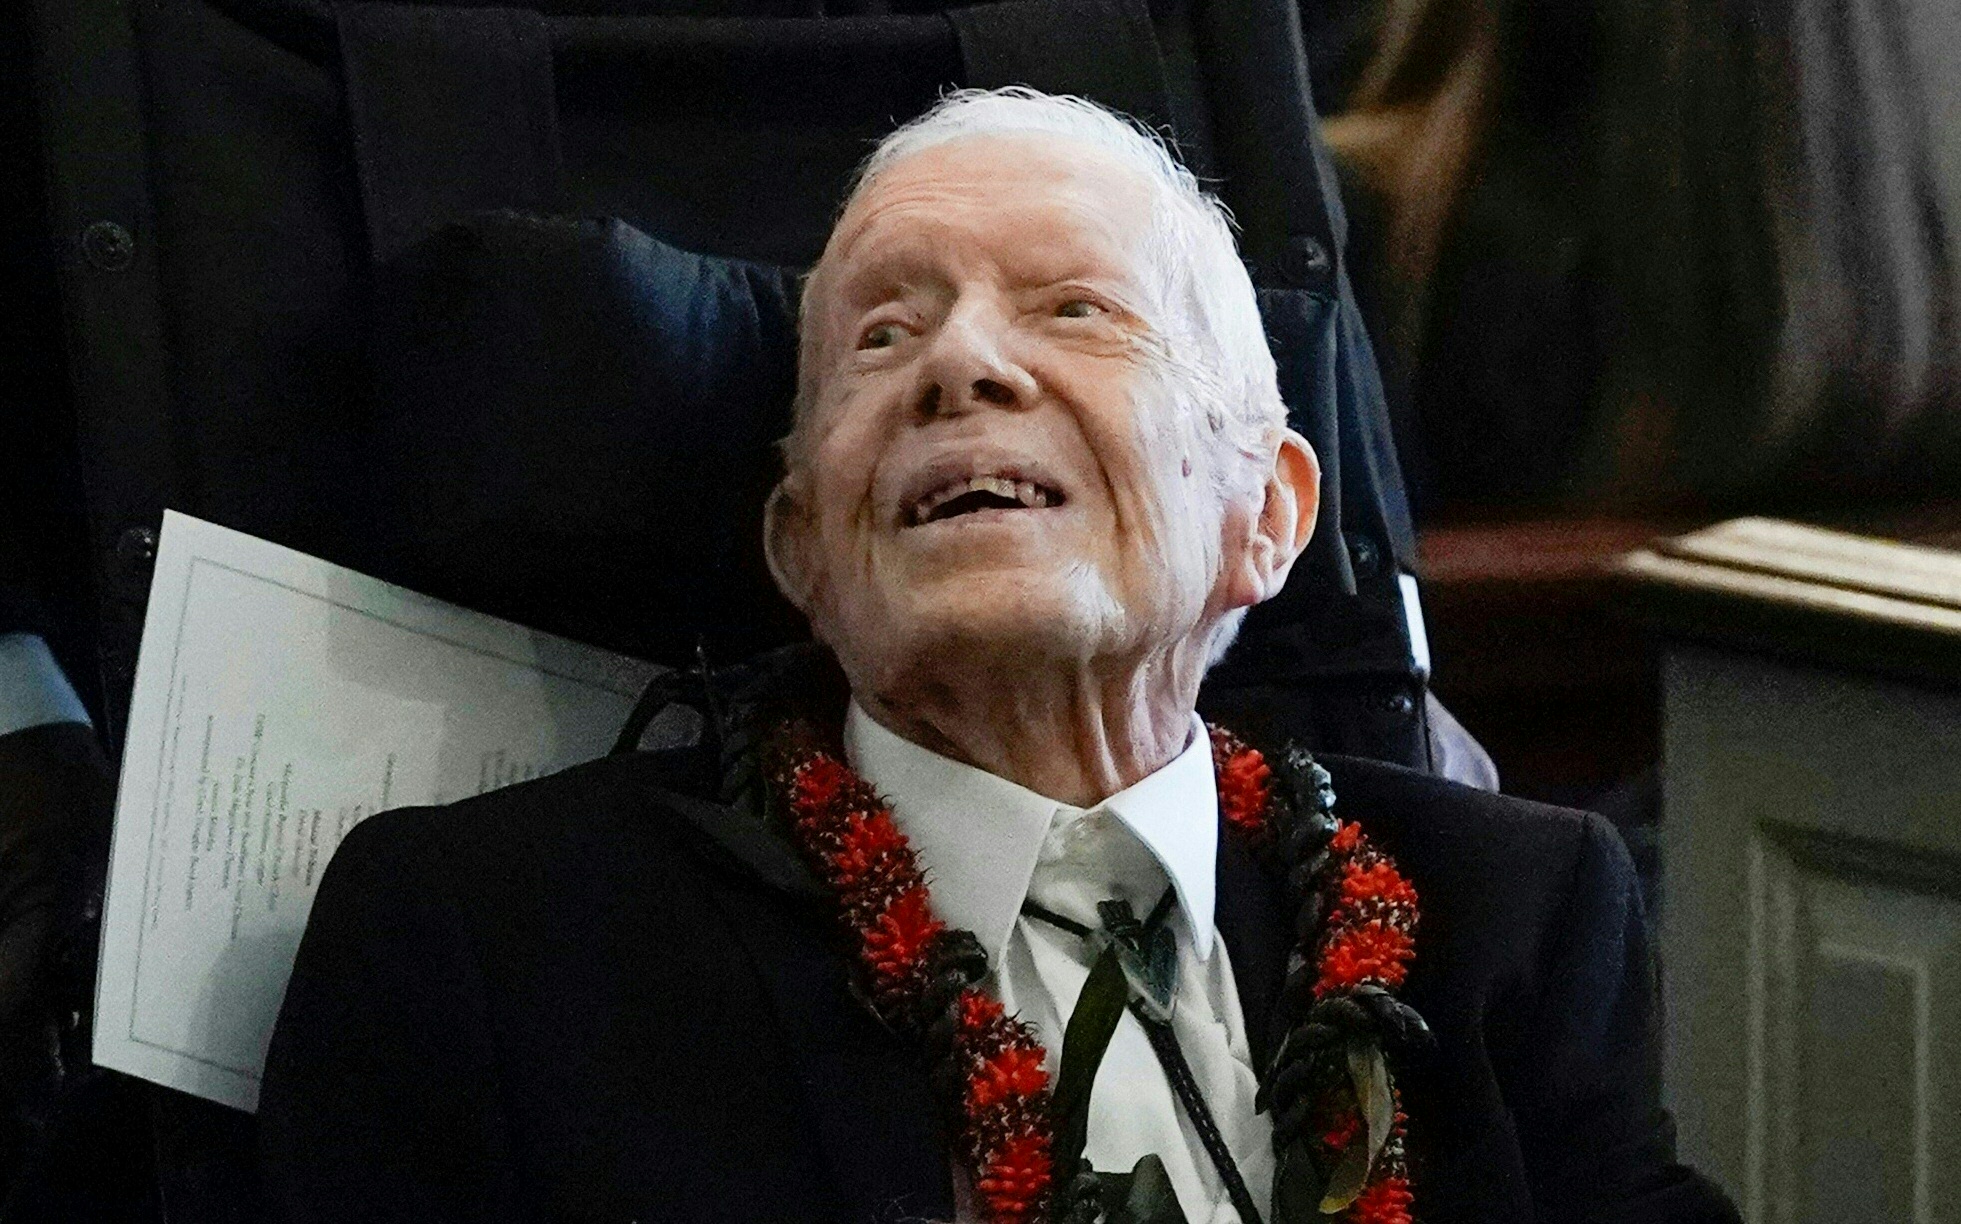 Former President Jimmy Carter at the funeral service of his wife Rosalynn Carter at Maranatha Baptist Church, in Plains, Georgia, on November 29, 2023. | Source: Getty Images